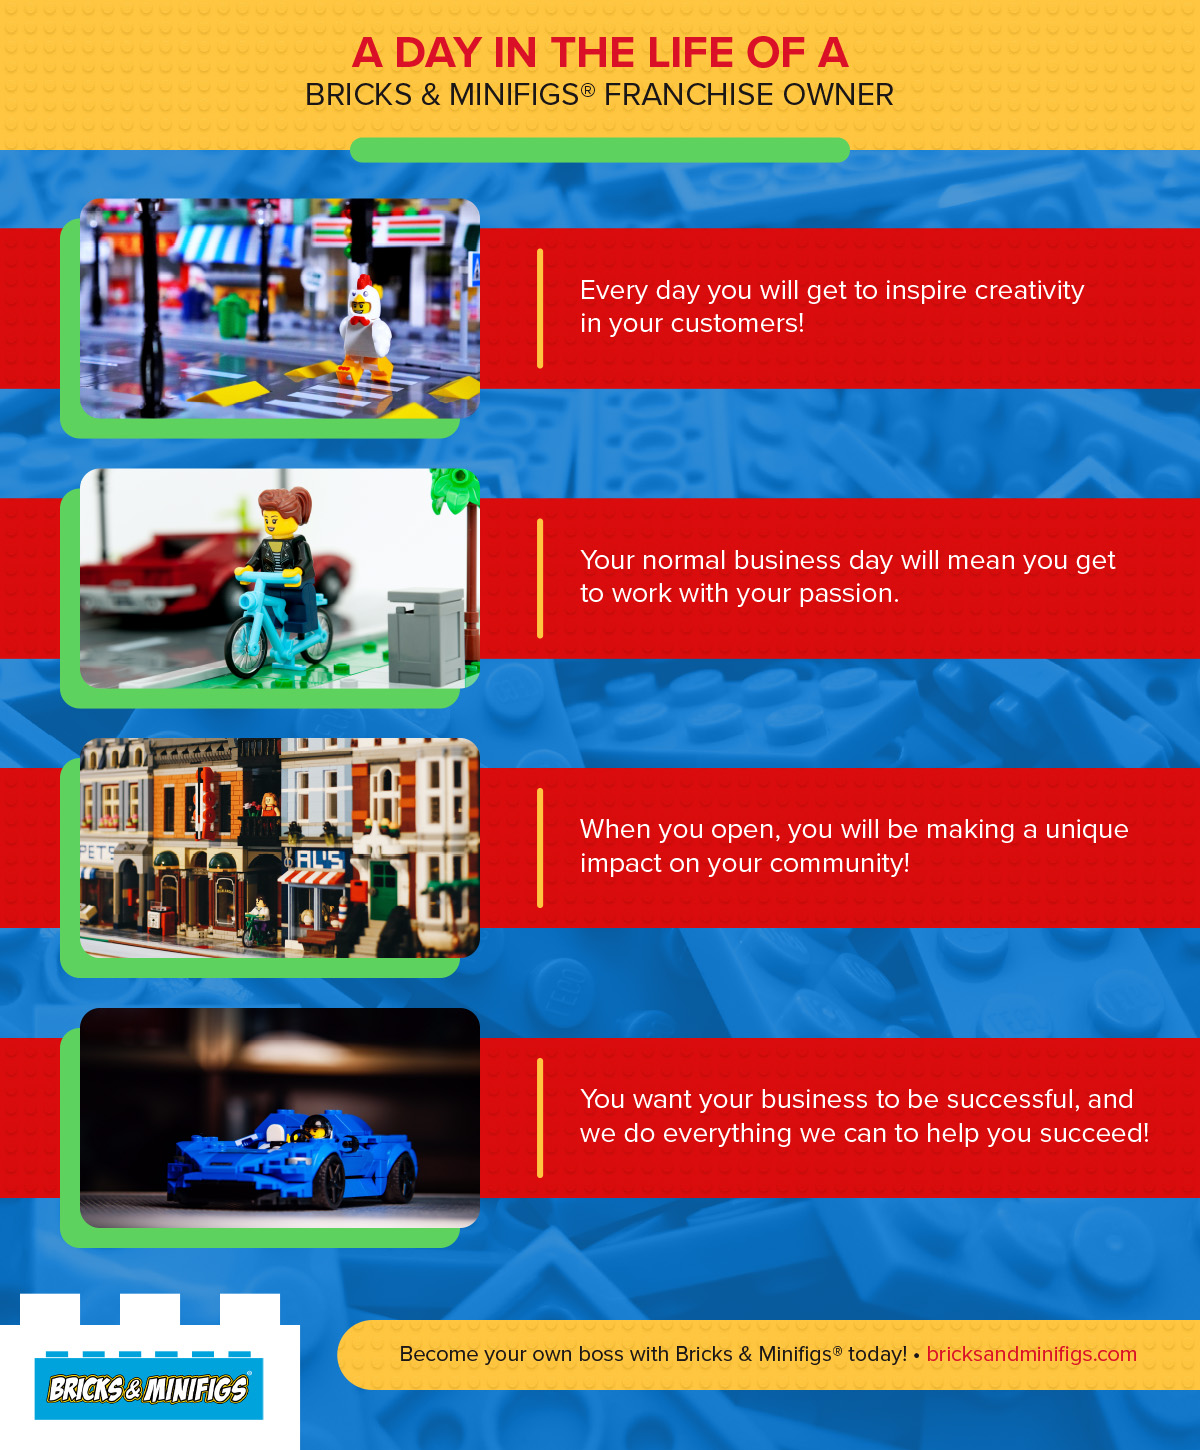 A Day in the Life of a Bricks & Minifigs® Franchise Owner Infographic